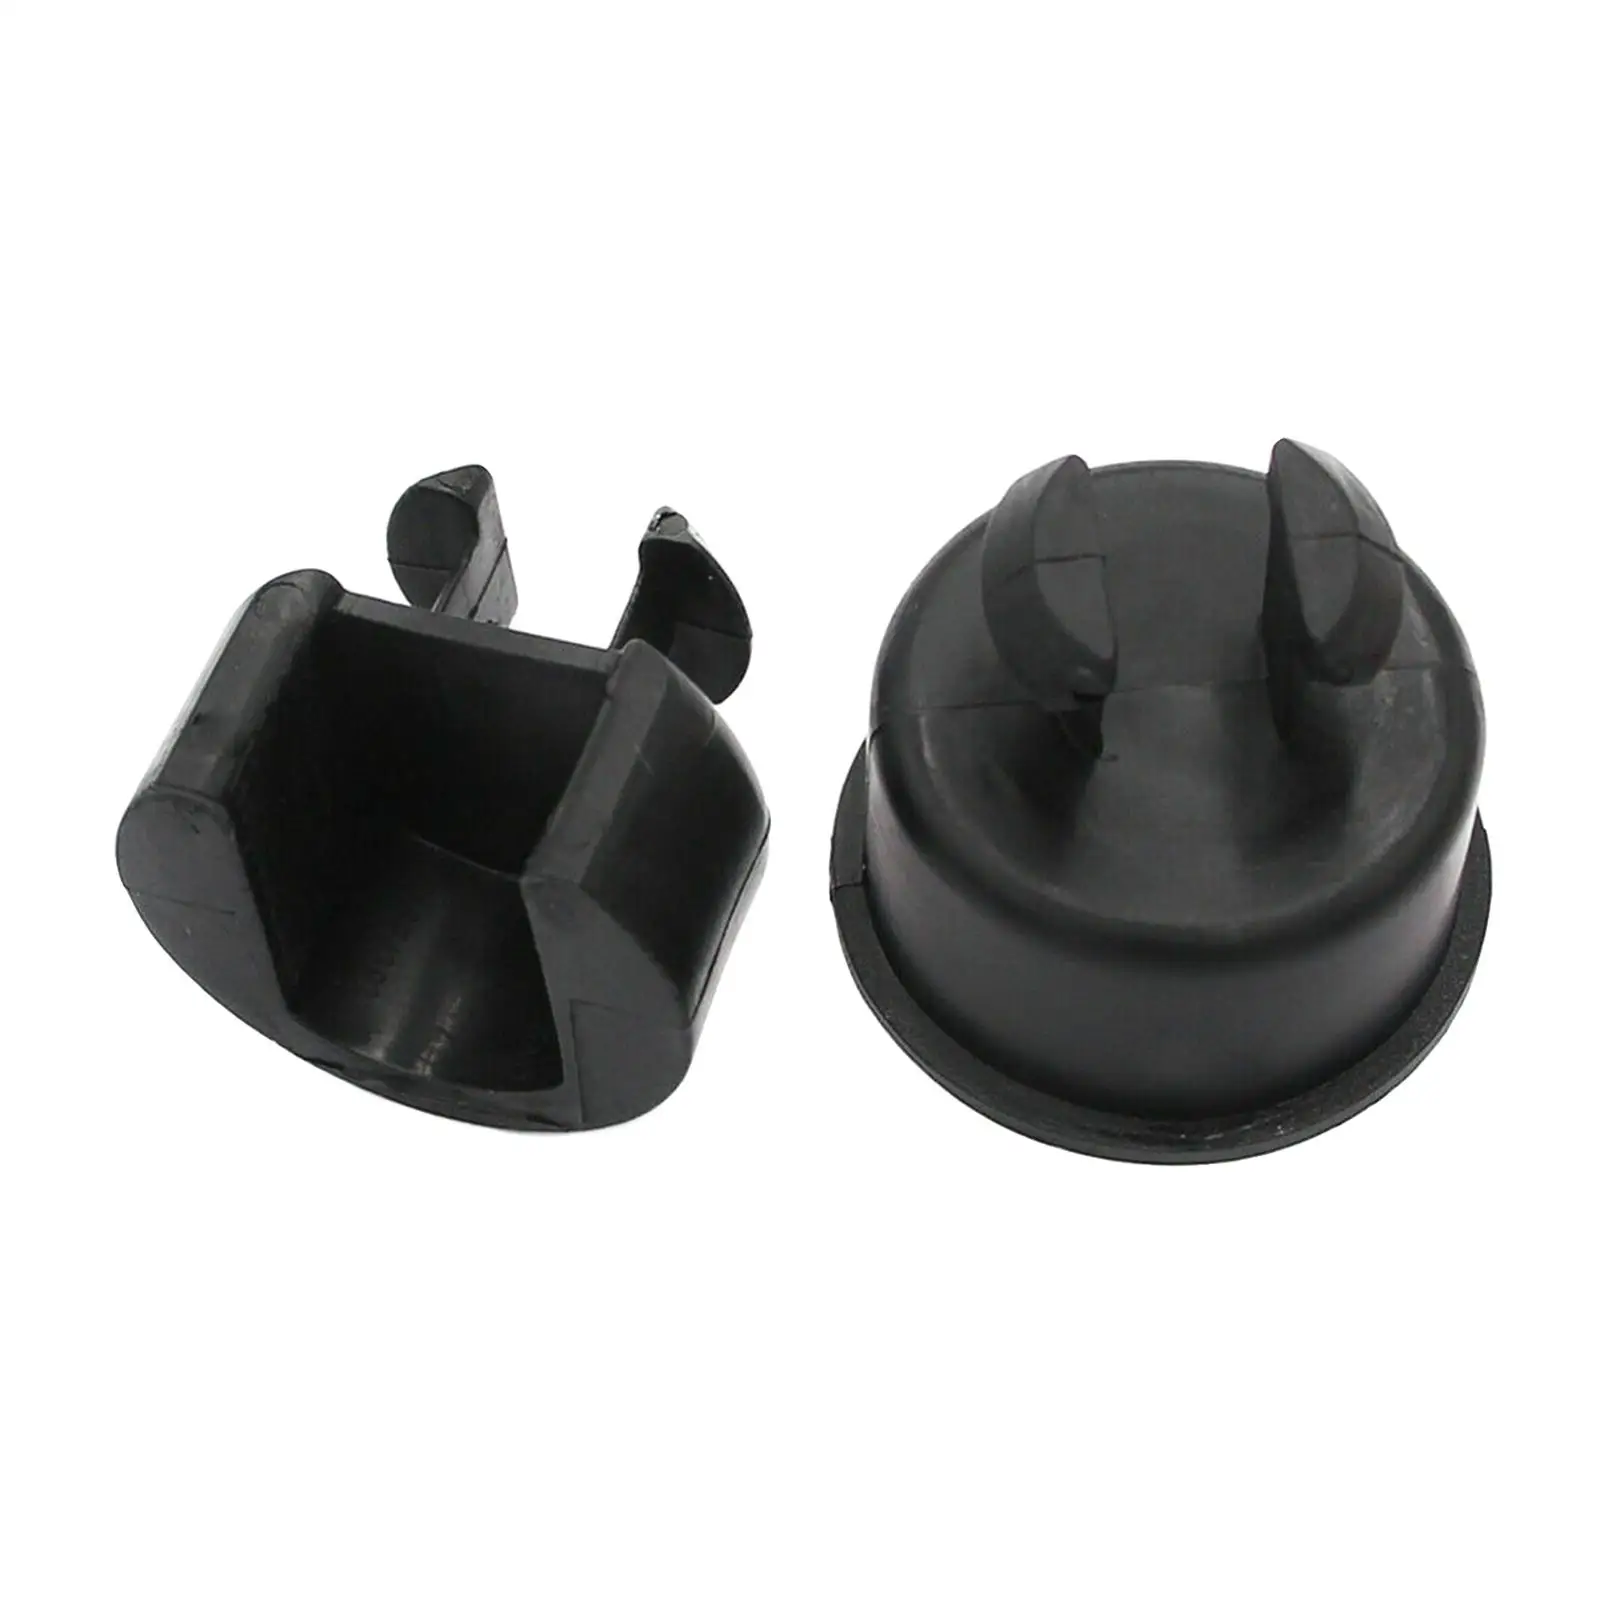 Set of 2 Tailgate Pivots Bushings Left and Right Car Supplies Black Plastic Assembly Fit for RAM 1500 2500 2002-2009 55276077Ab